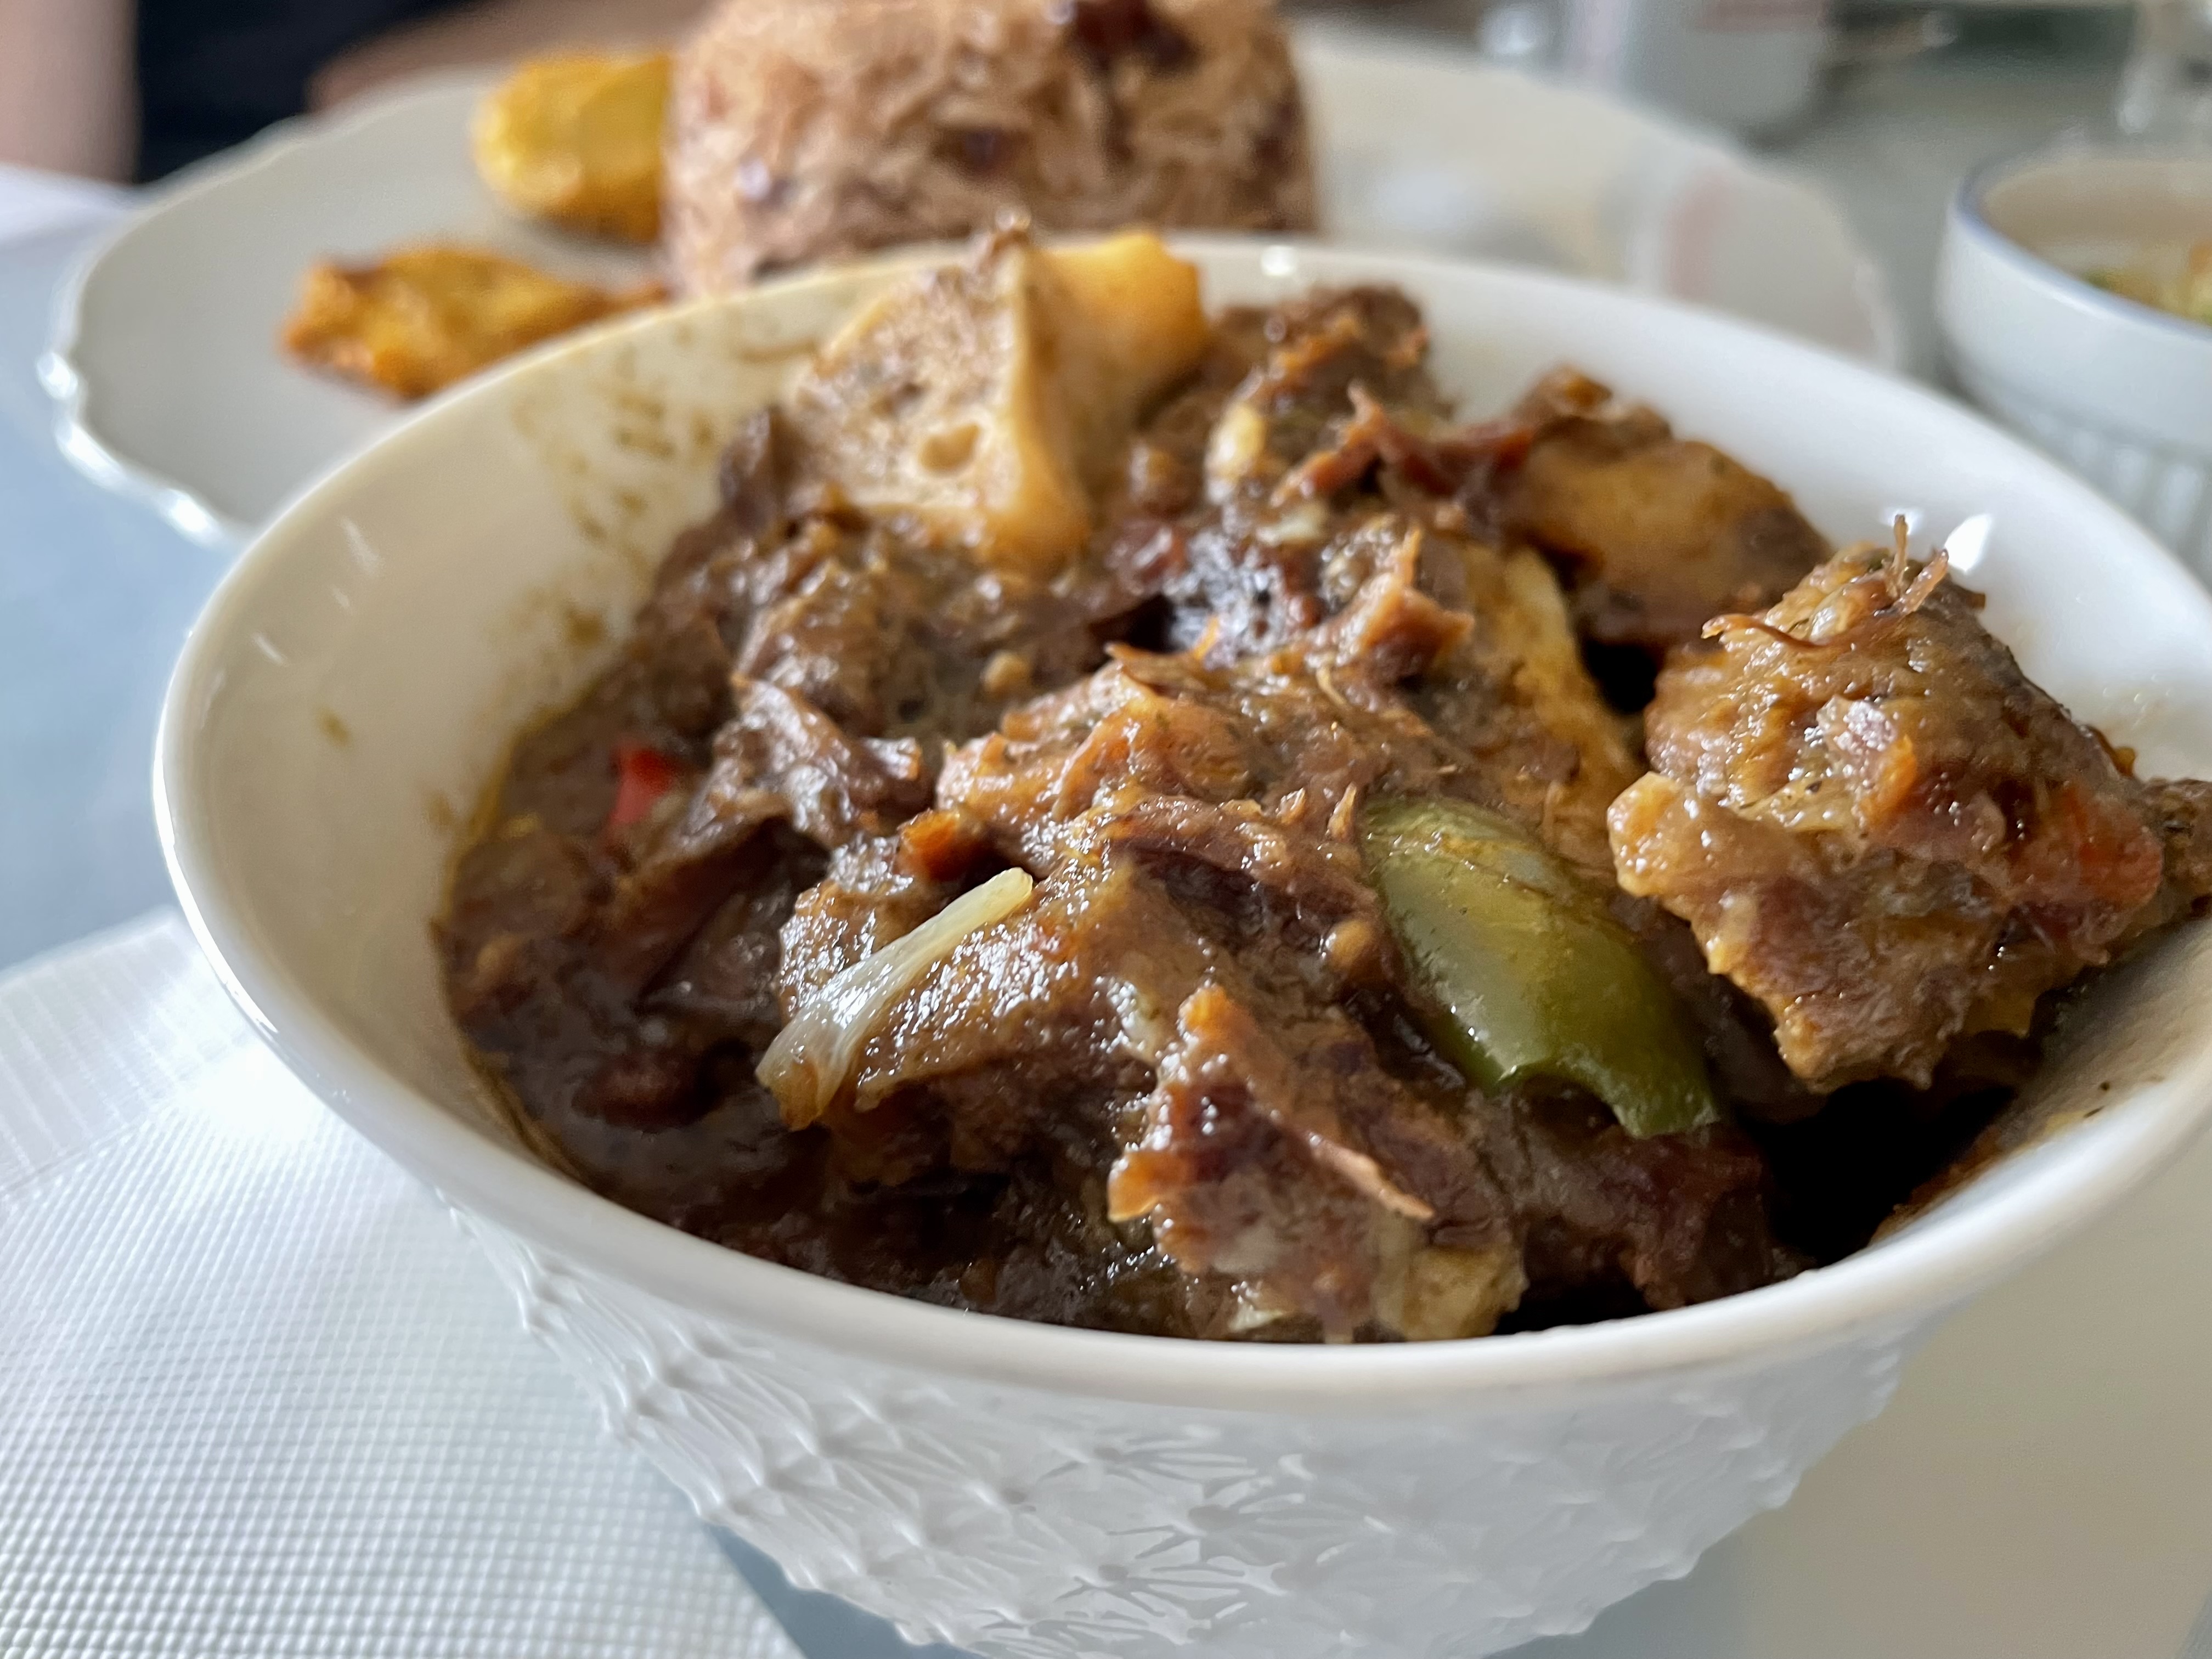 The Jamaican oxtail arrived with a Haitian twist